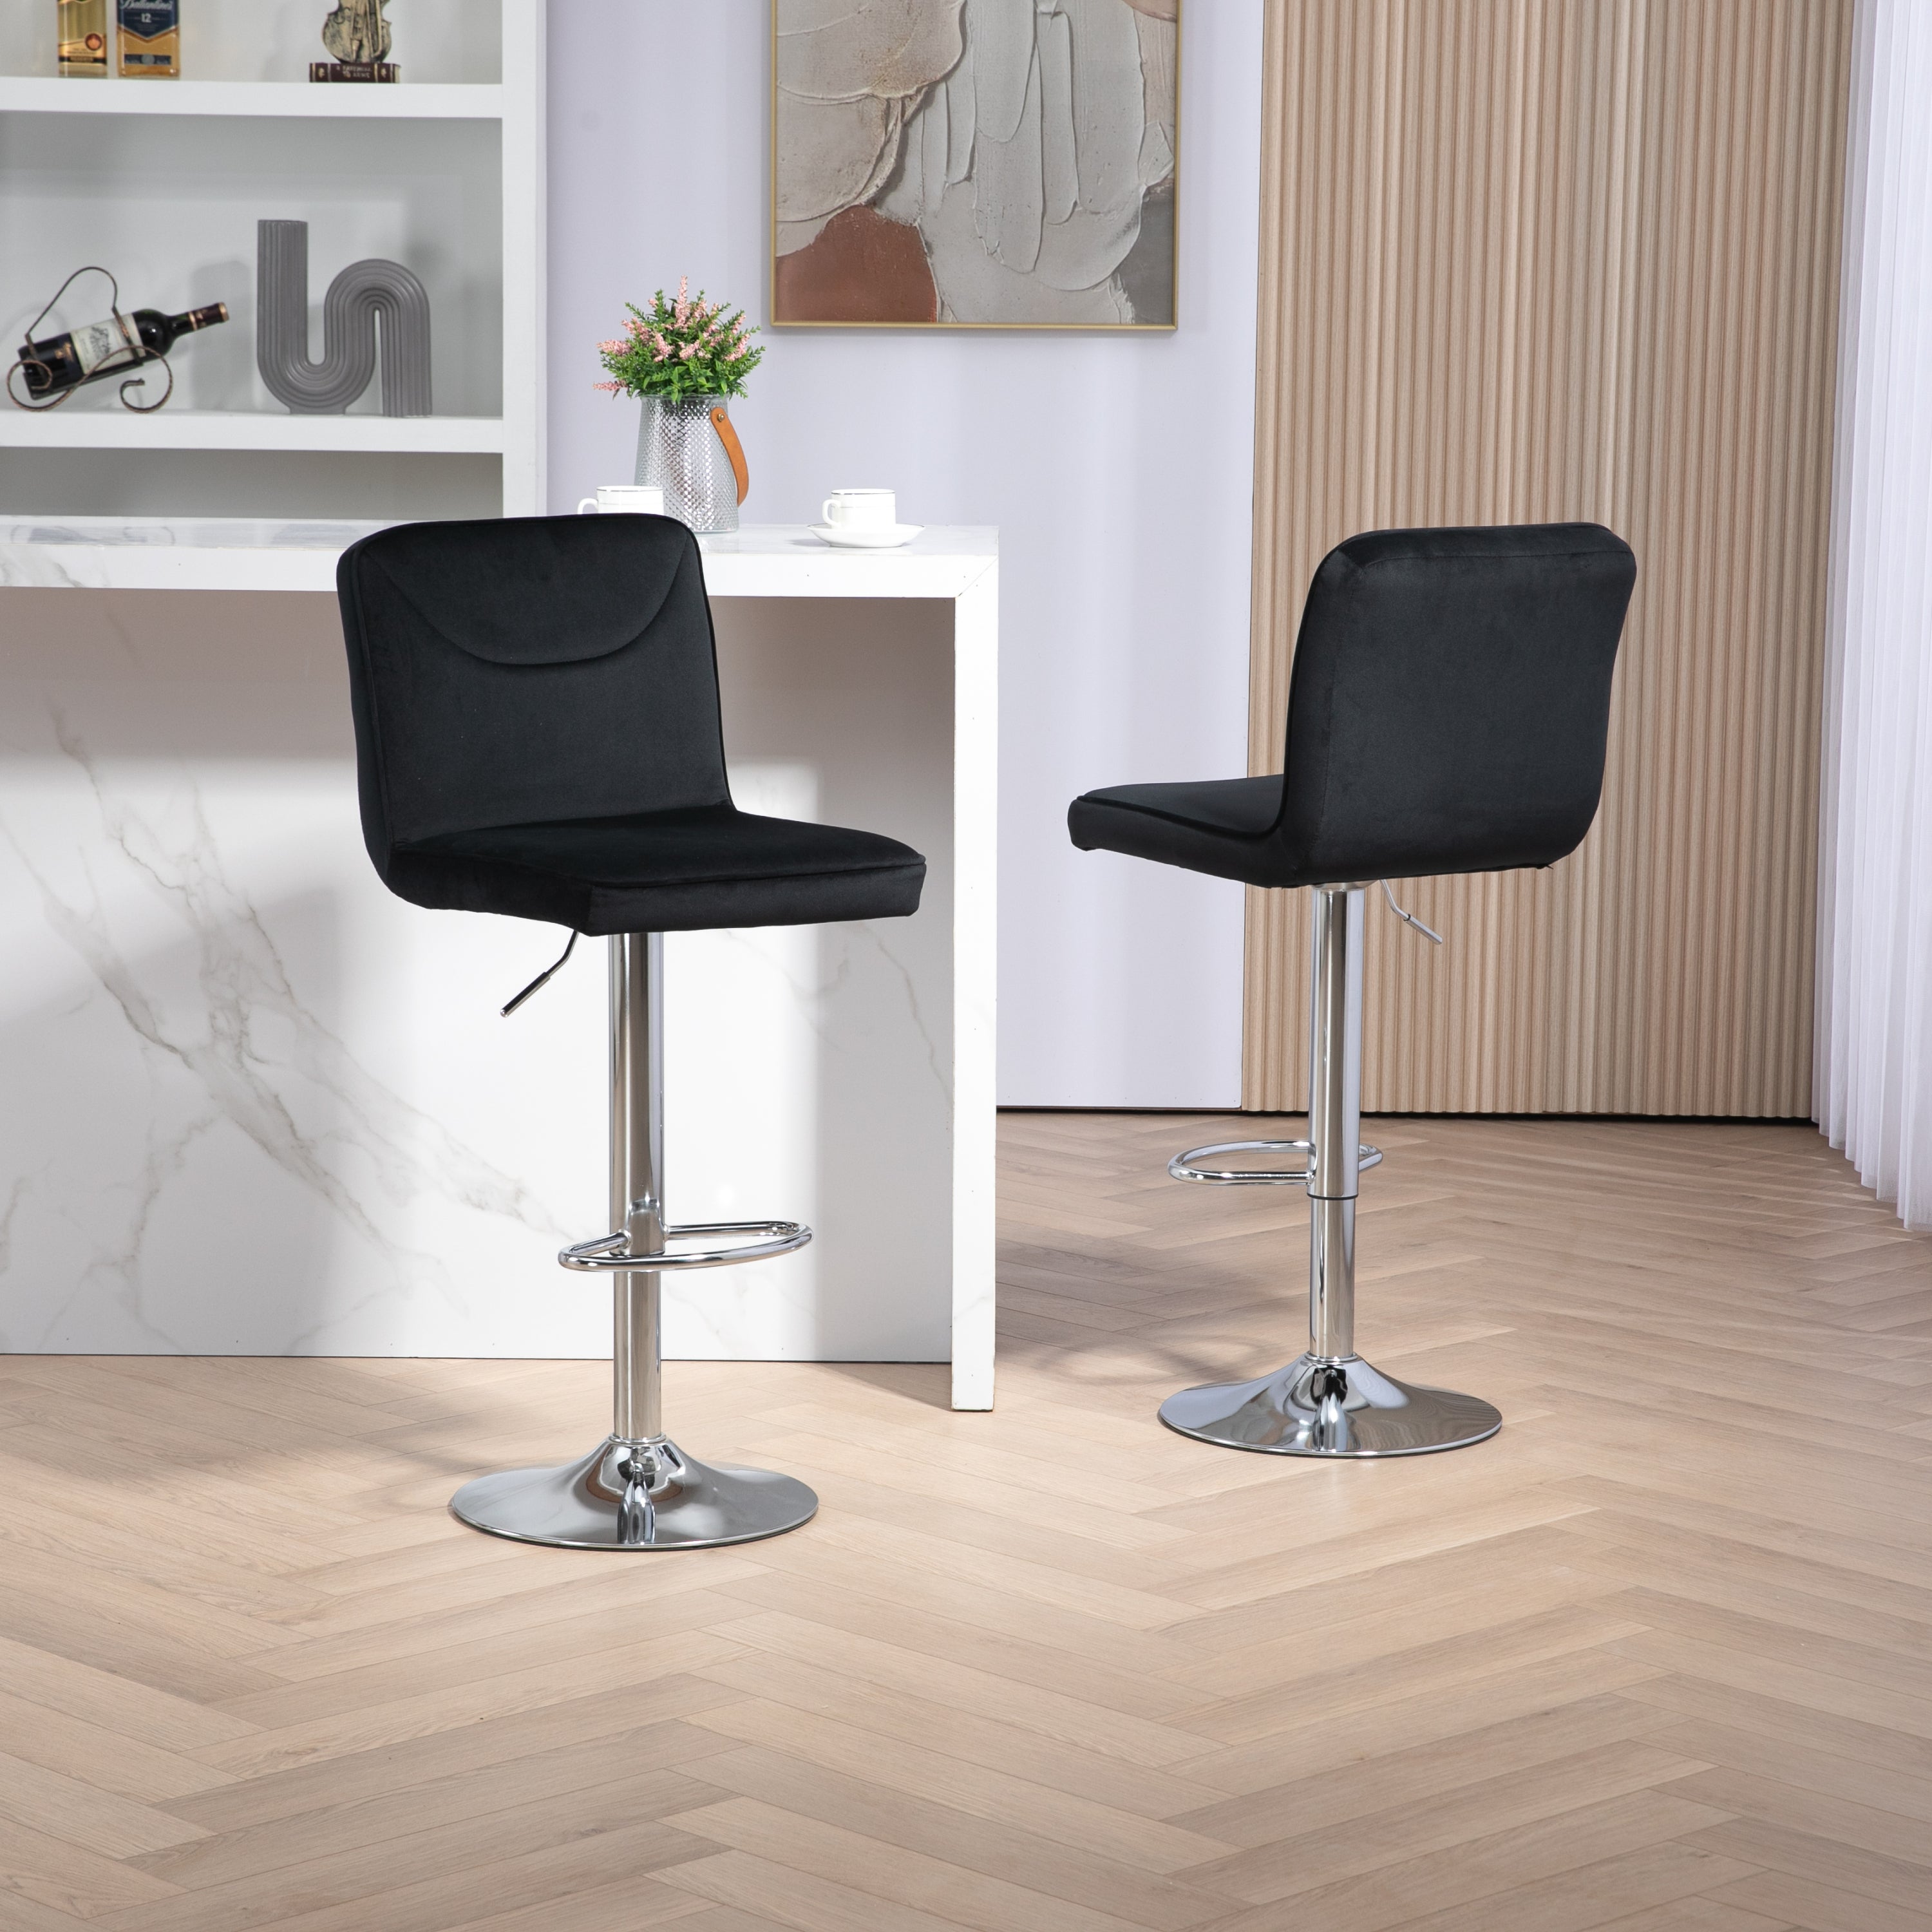 🆓🚛 Modern Swivel Bar stools Set of 2, Adjustable Counter Height Bar Chairs, with Backrest Footrest, Chrome Base, Black